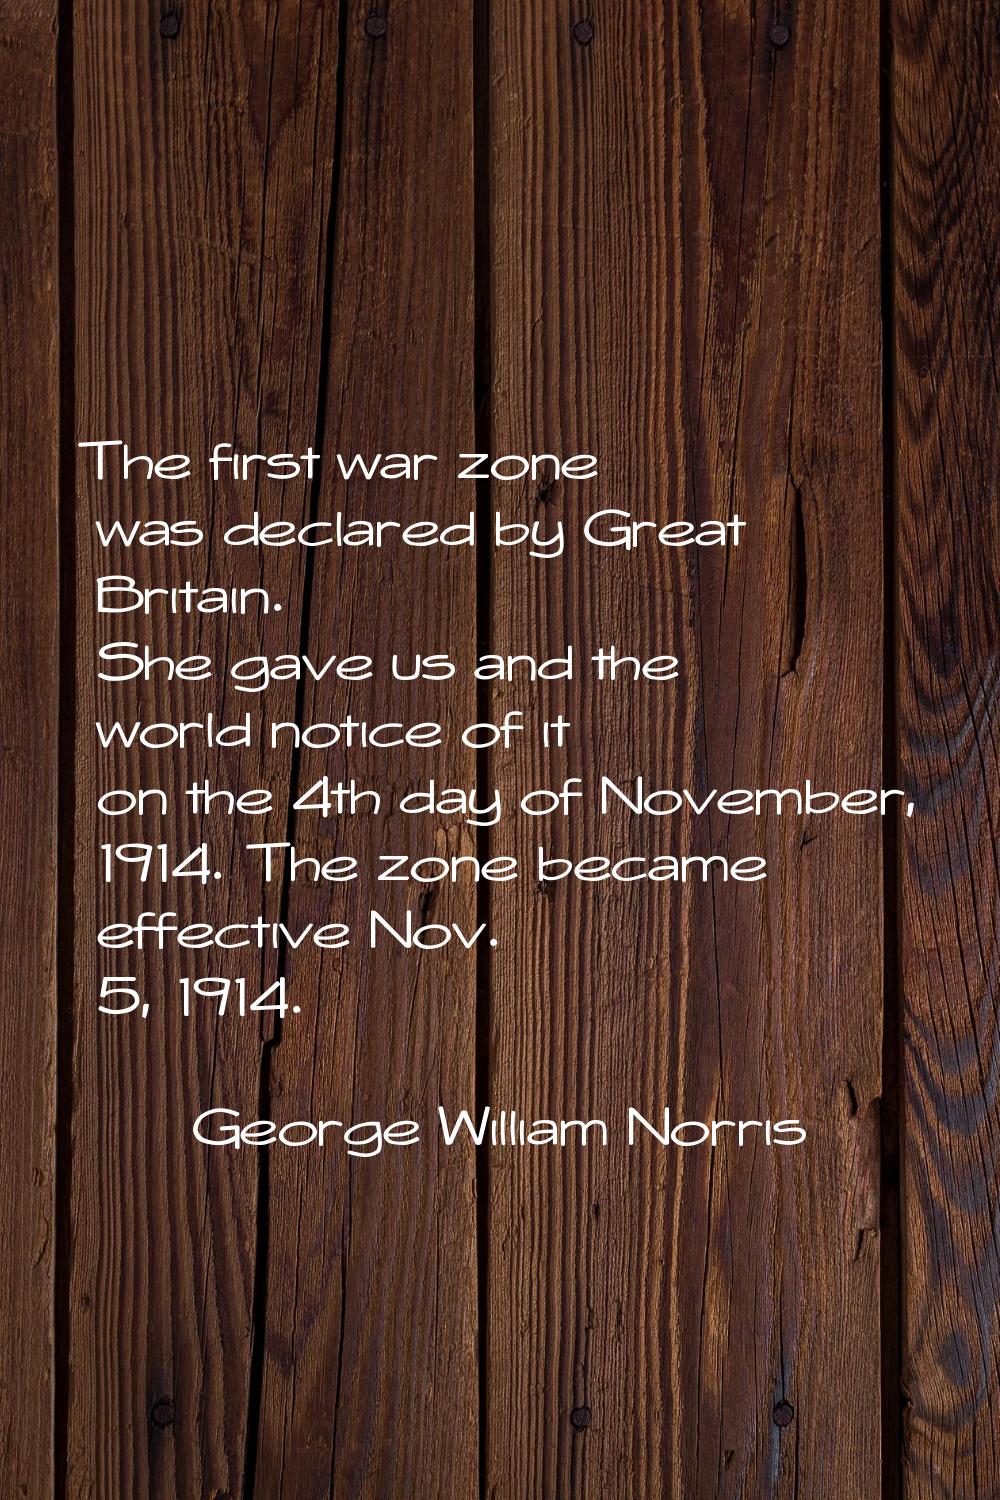 The first war zone was declared by Great Britain. She gave us and the world notice of it on the 4th